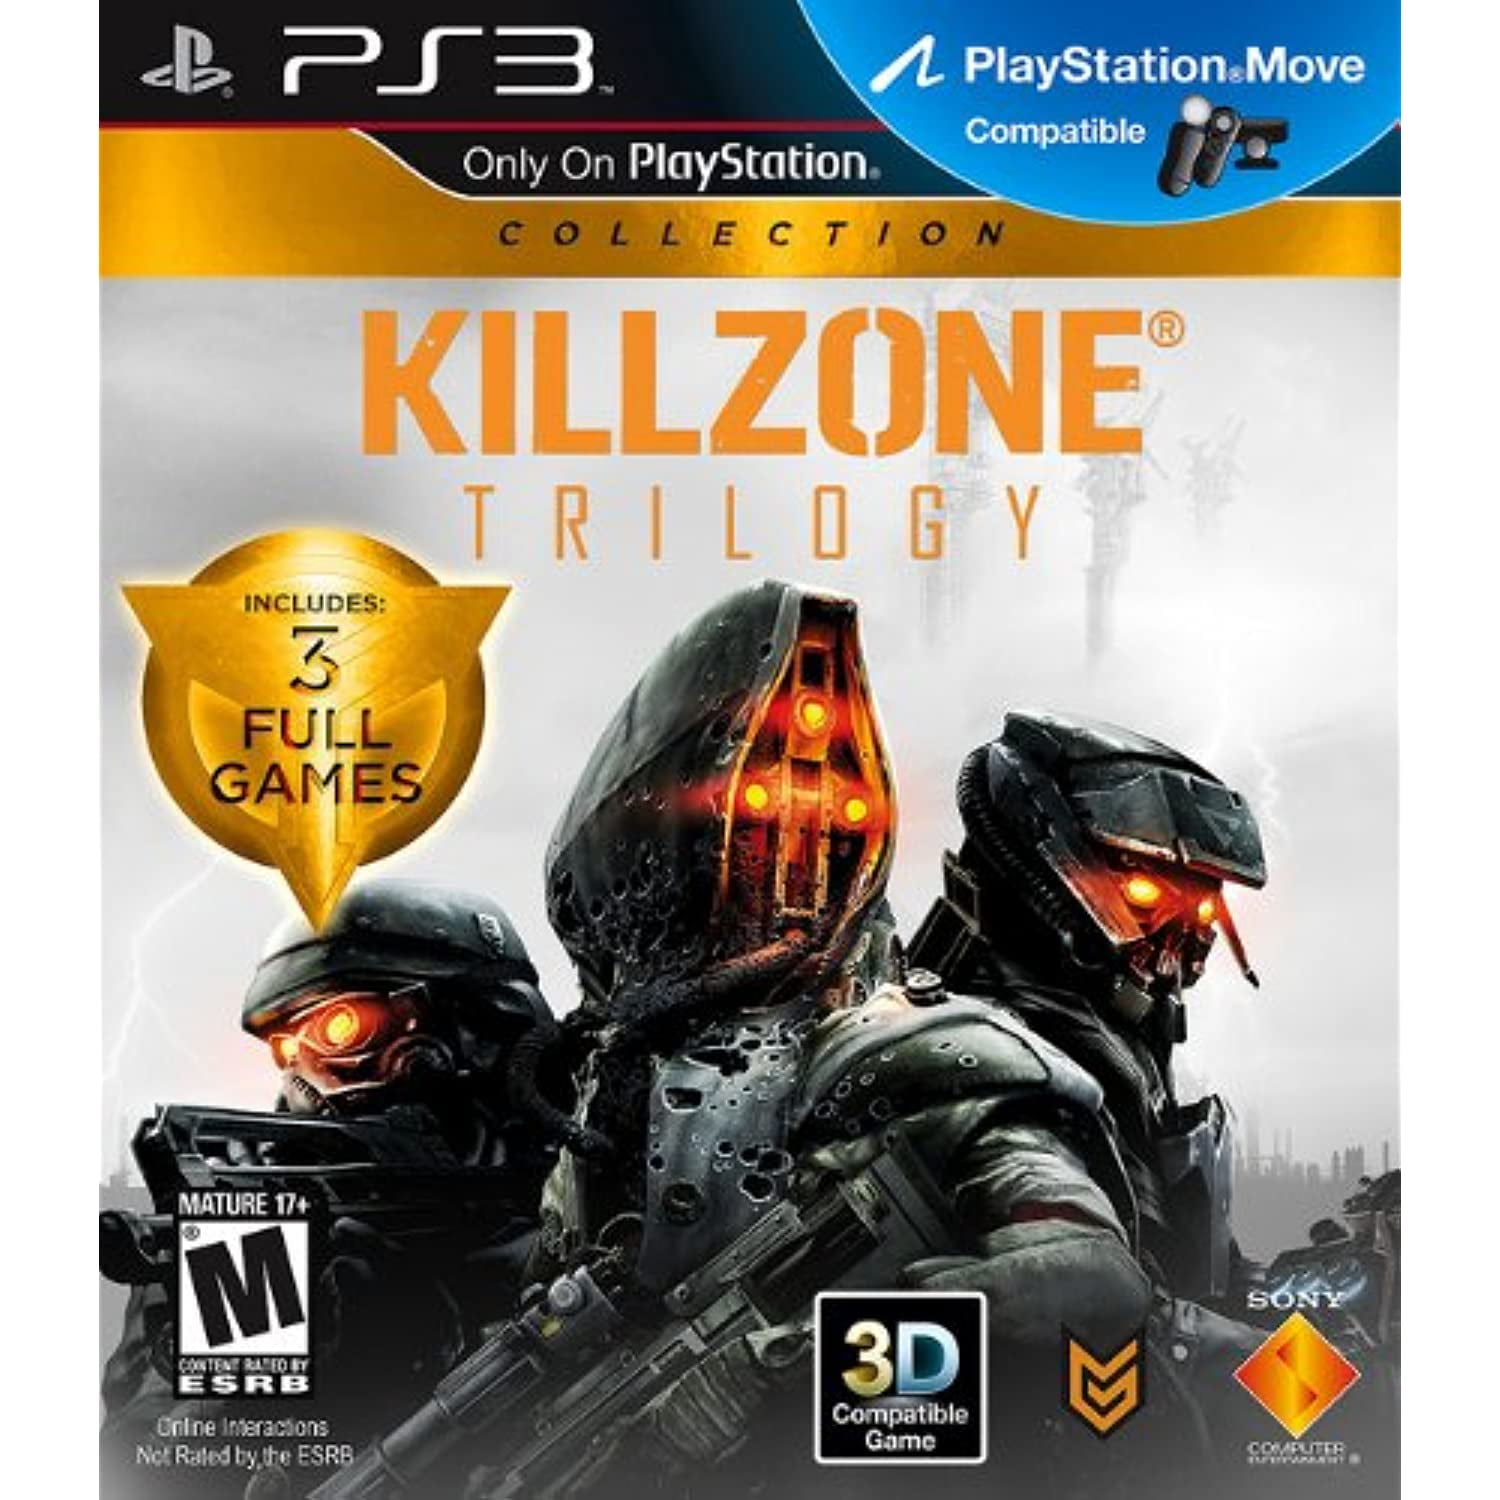 Ps3 Killzone Trilogy Collection - 2 Disc 